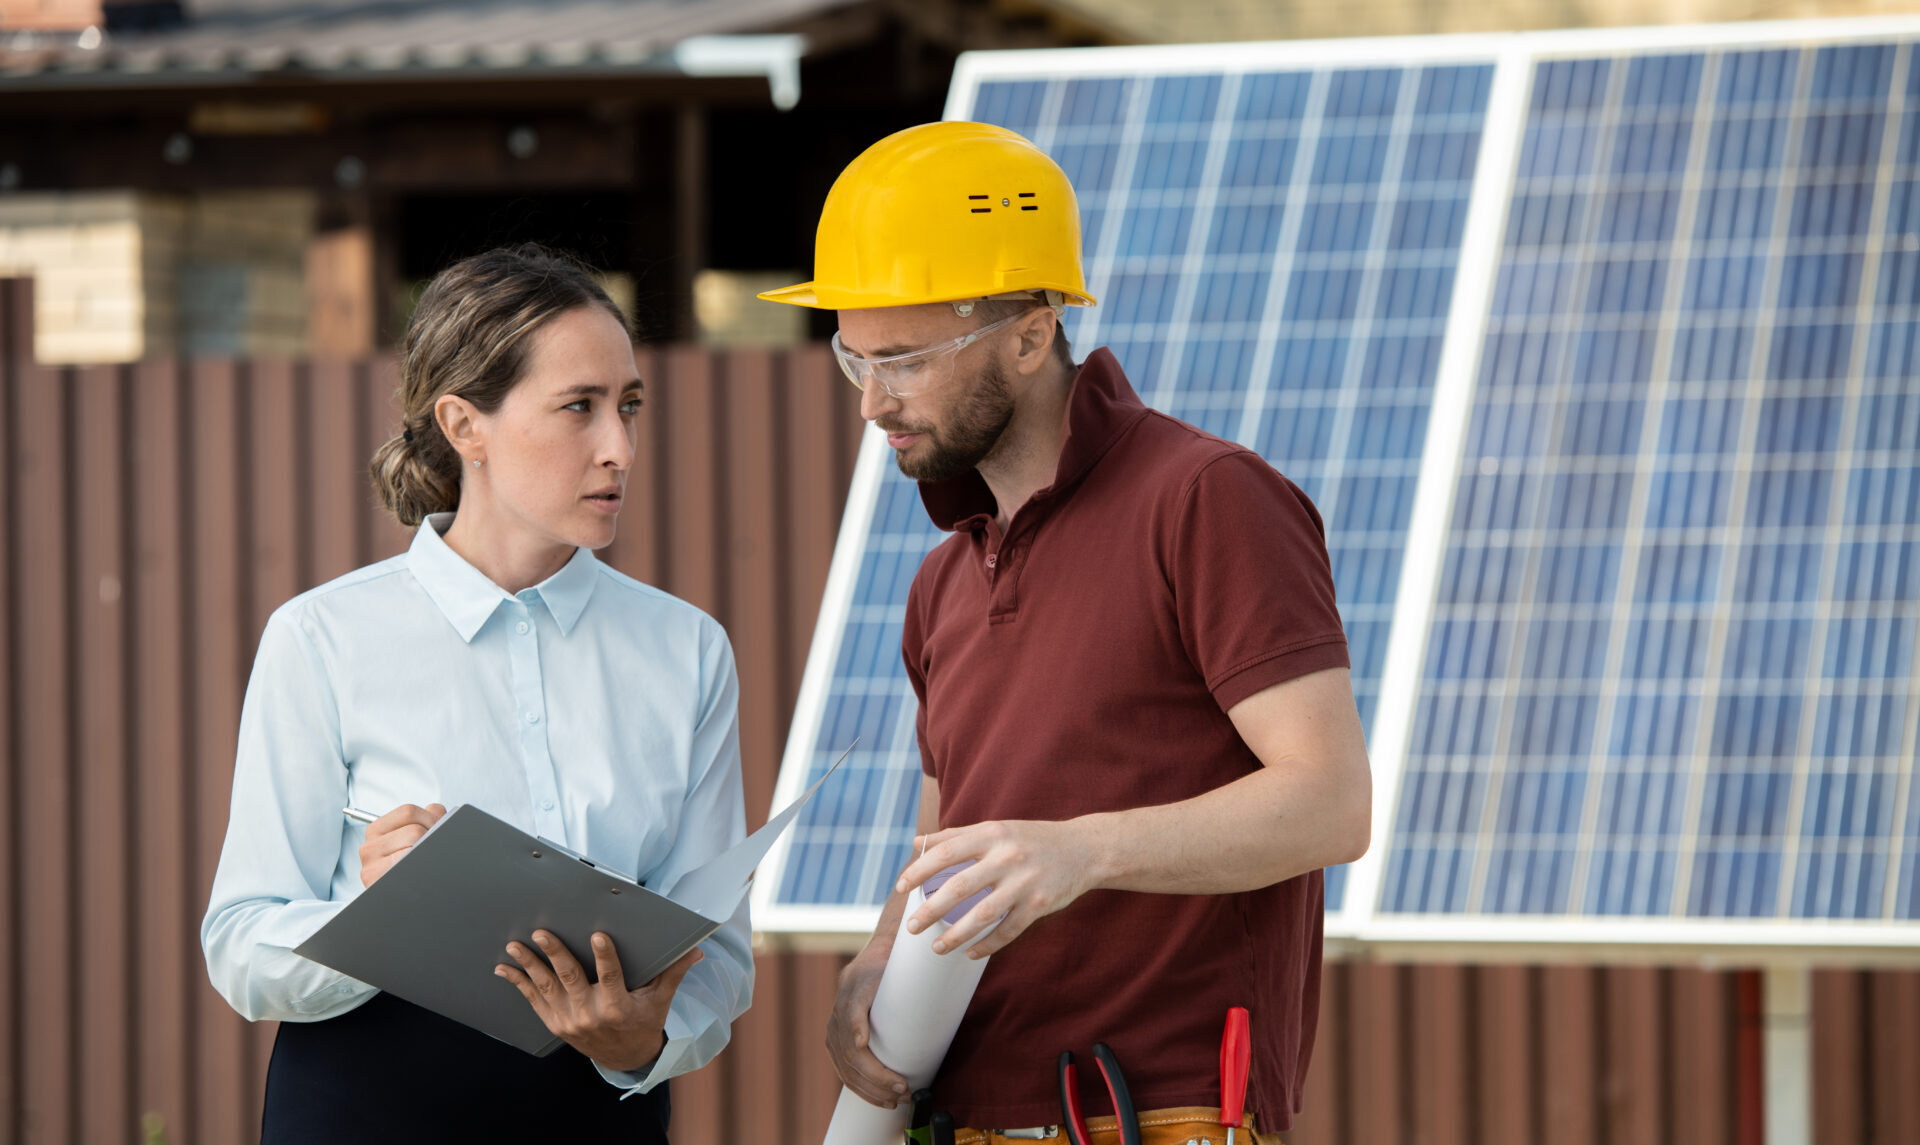 woman holding a clipboard talking to a man in a hard hat and safety glasses with solar panels behind them